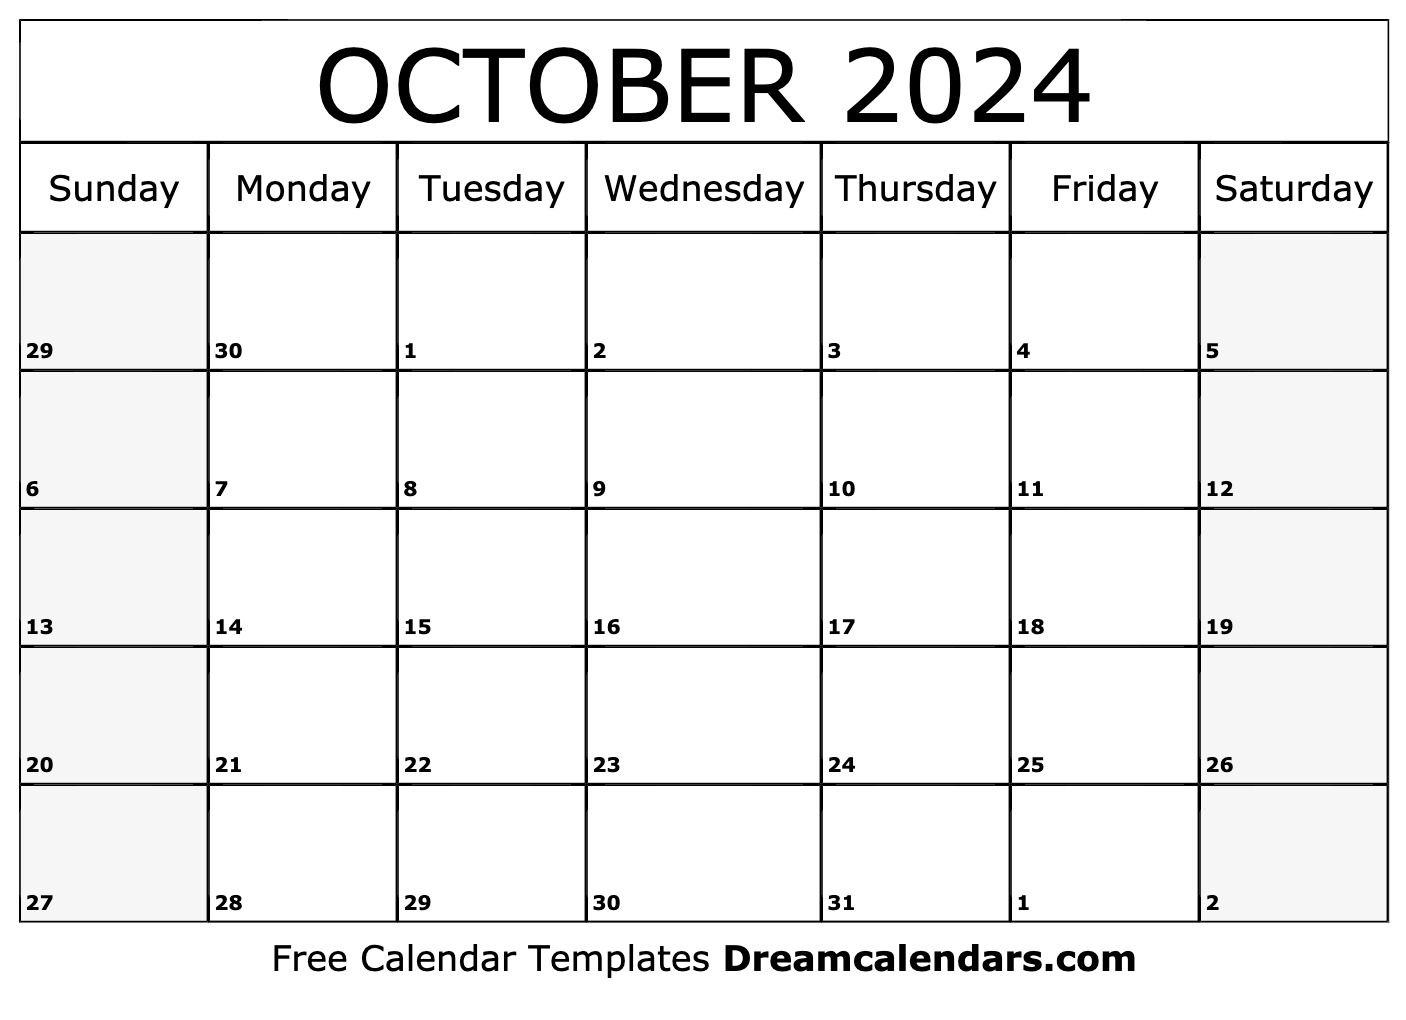 October 2024 Calendar | Free Blank Printable With Holidays | October Printable Calendar 2024